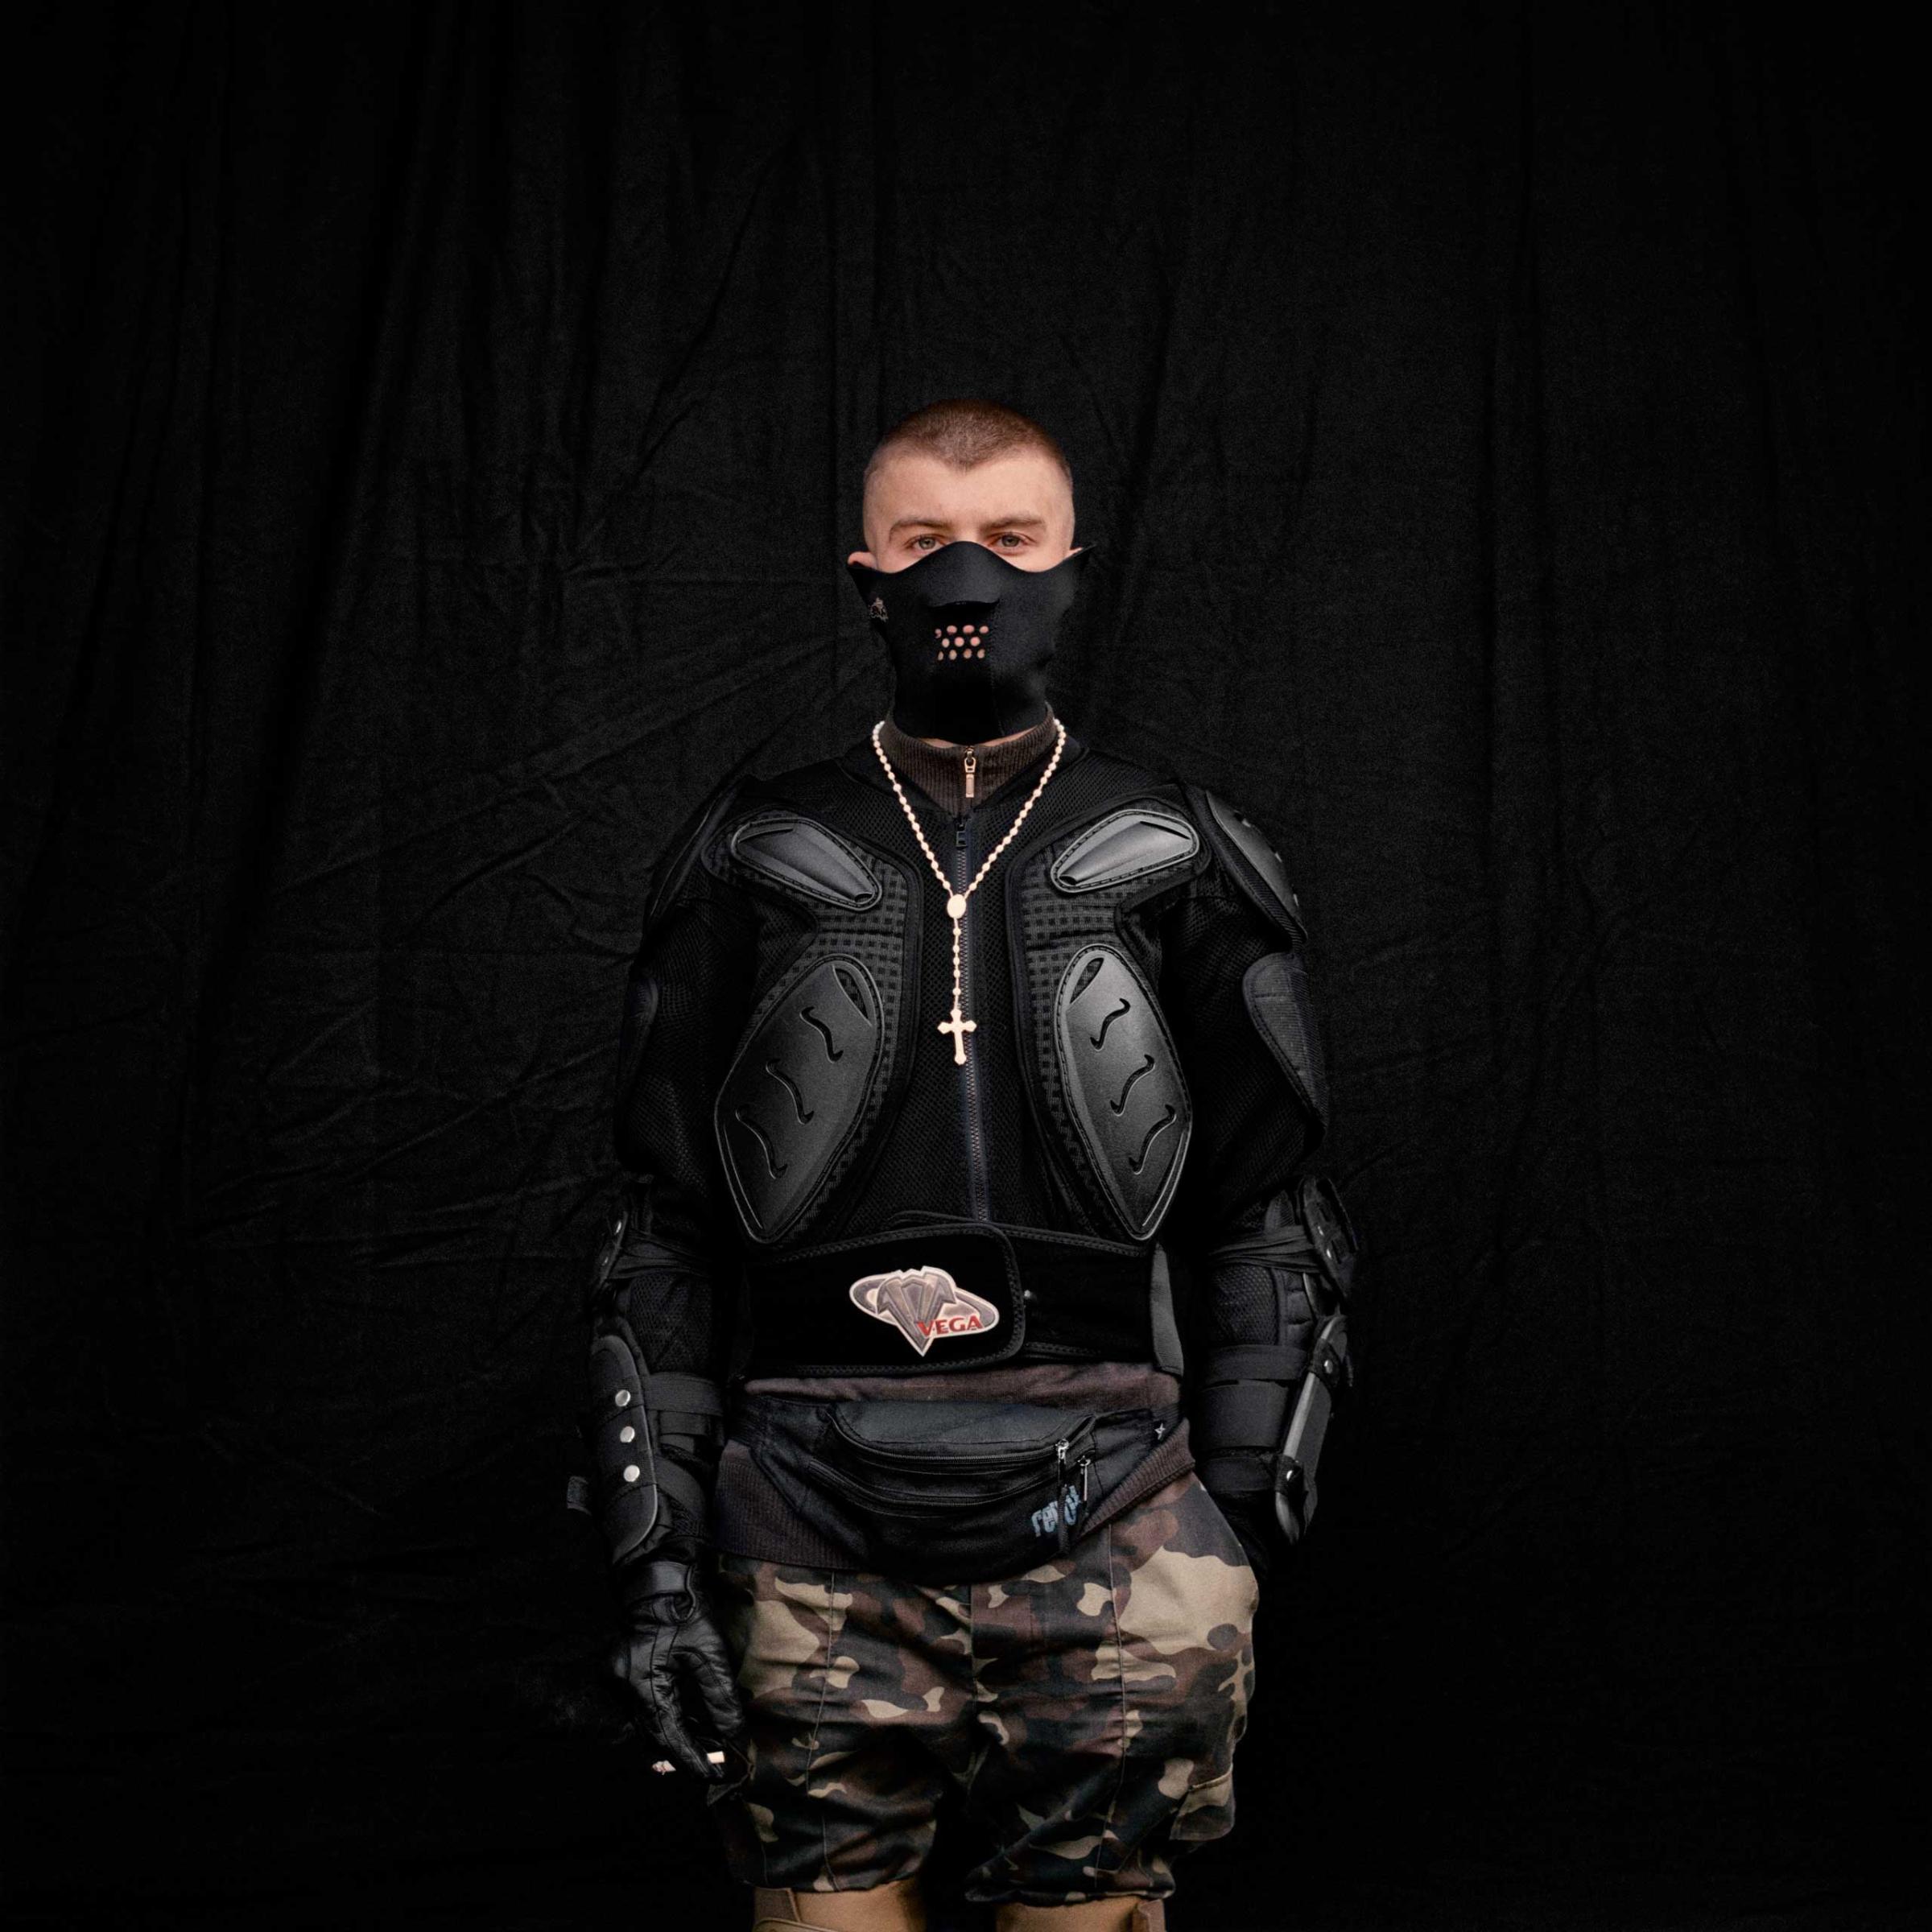 MAIDAN - Portraits from the Black Square